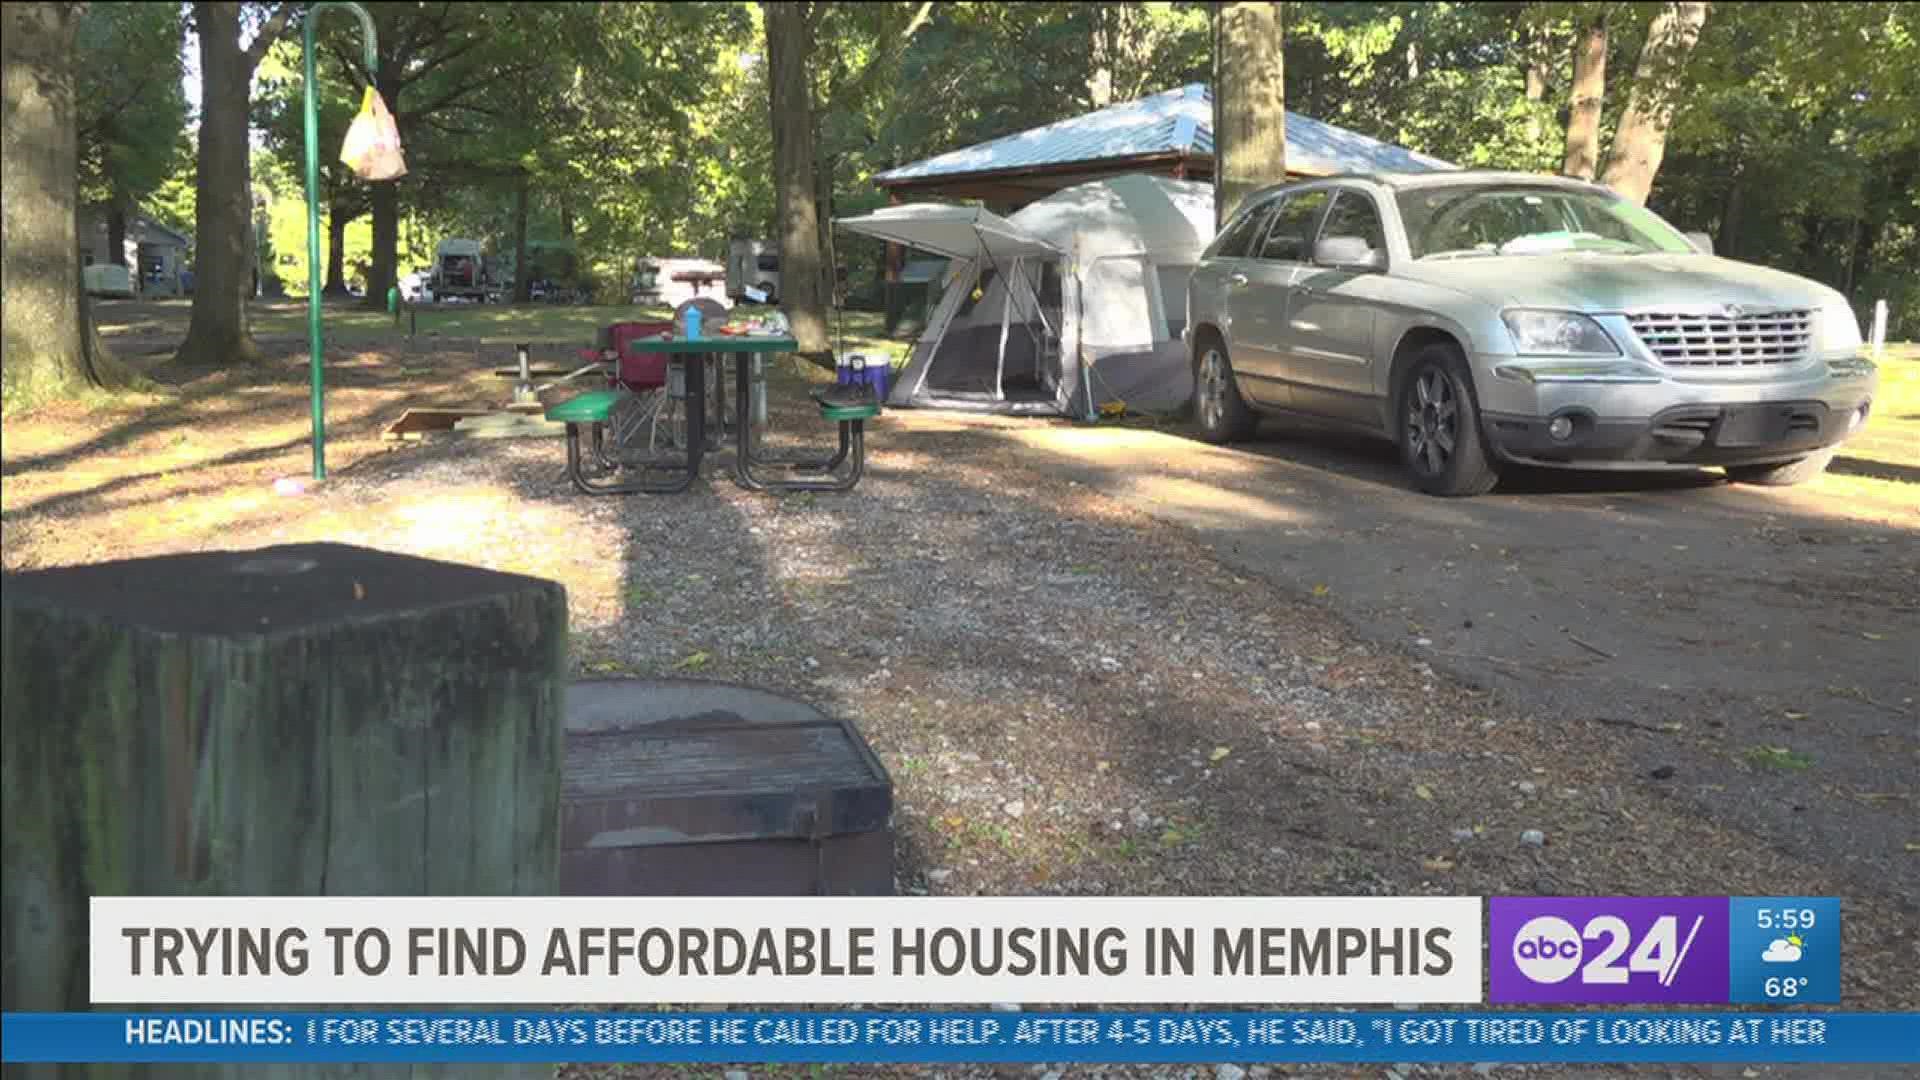 The Martinez family has spent five weeks at Mid-South campgrounds after their housing plans fell through.